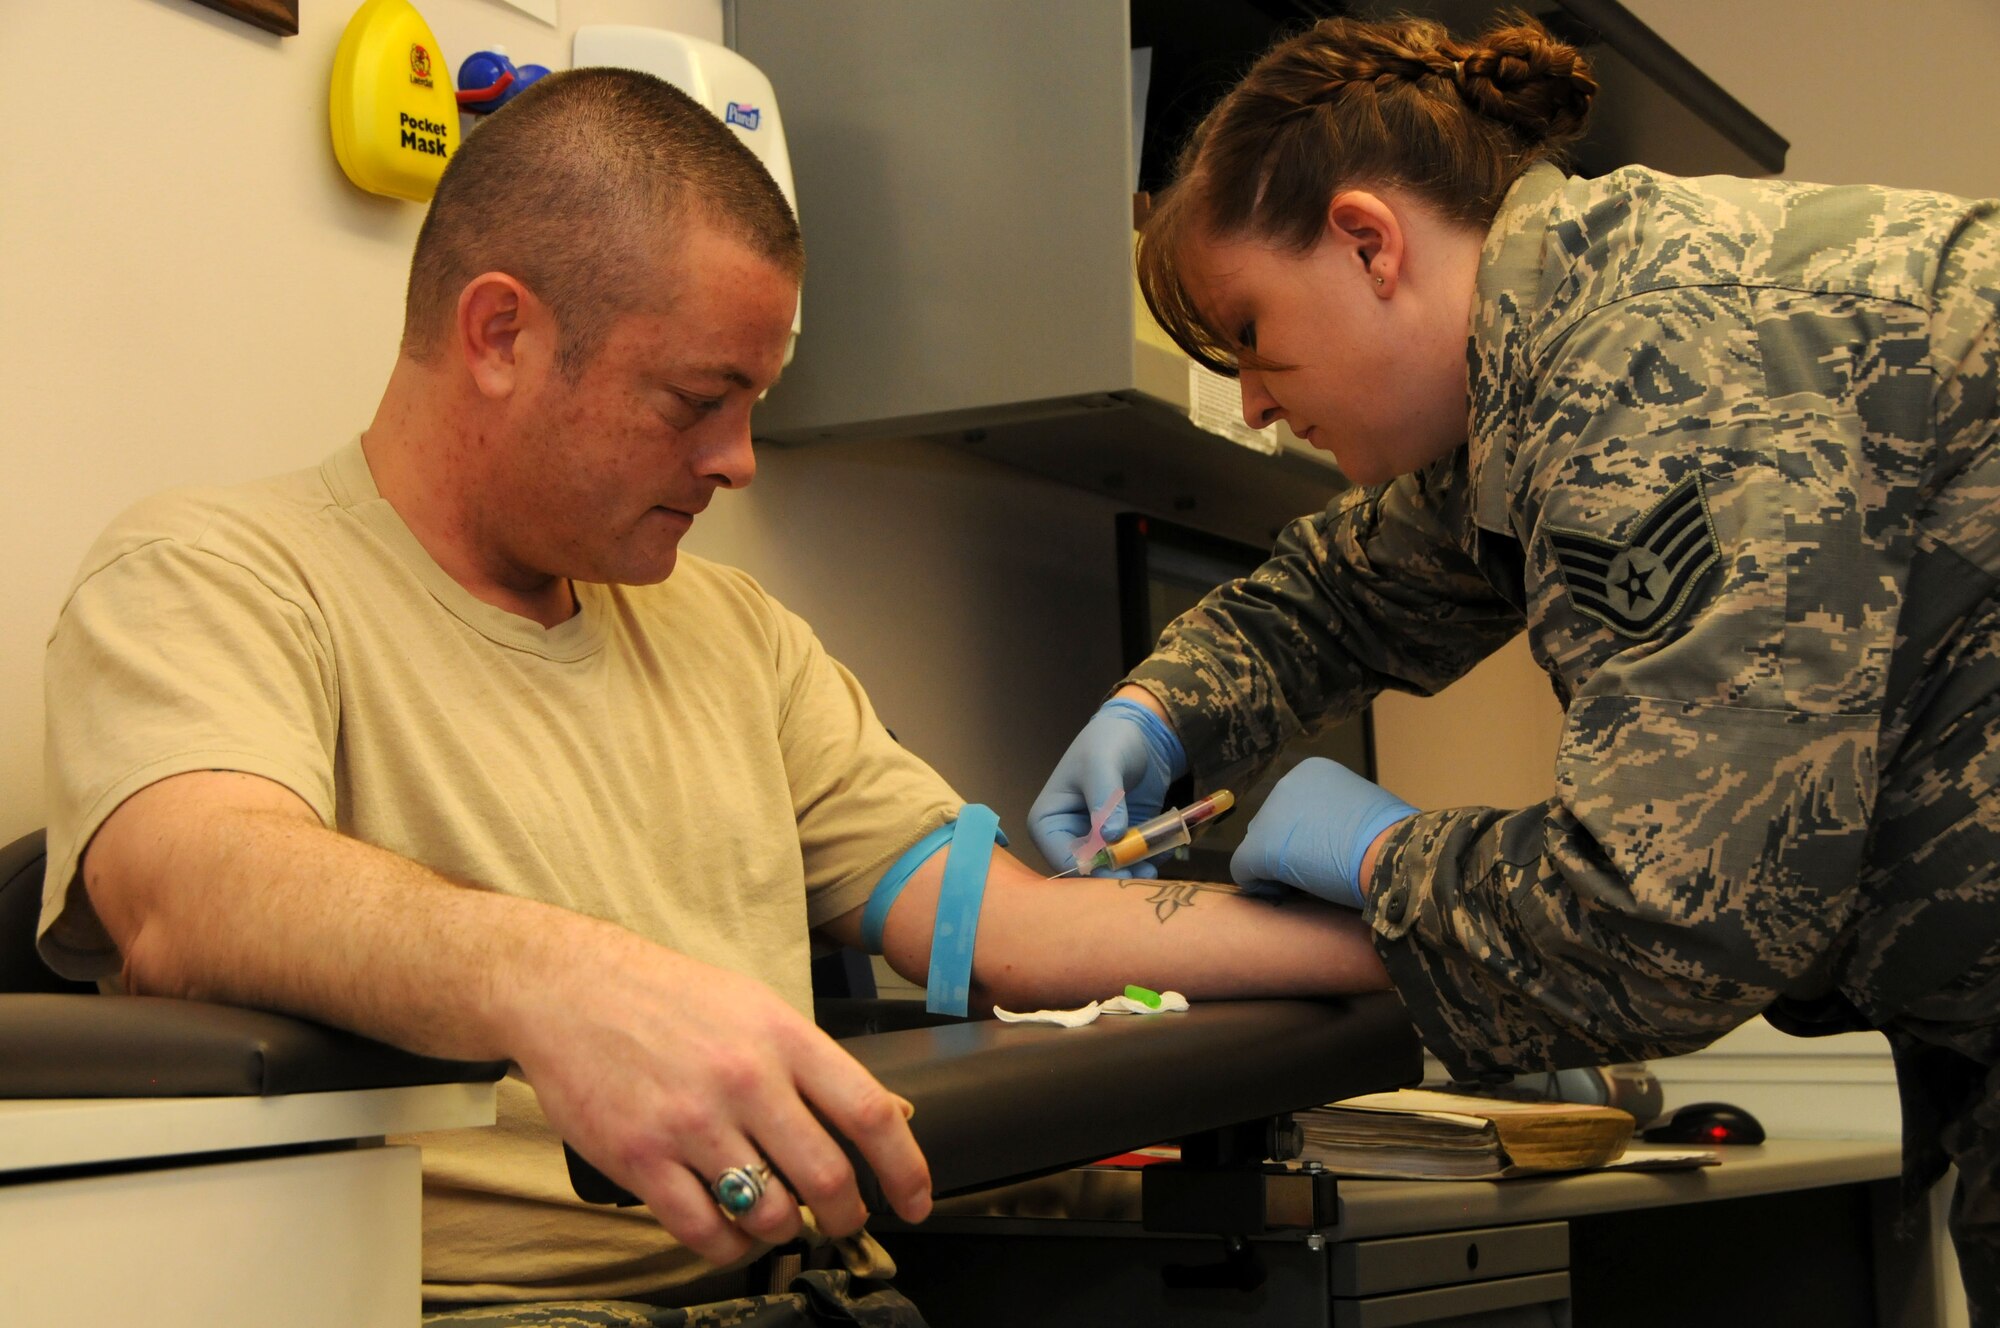 U.S. Air Force Tech. Sgt. Matthew Comiskey, 114th Fighter Squadron, gets his blood drawn by Staff Sgt. Jessica Bridges, 173rd Fighter Wing Medical Group Lab Technologist, to complete one of his individual medical readiness requirements at Kingsley Field, Ore., Feb 7, 2015. Currently, the 173rd FW is maintaining an overall individual medical readiness rate higher than the total Air National Guard and Active Duty counterparts. (U.S. Air National Guard photo by Senior Airman Penny Snoozy/Released)
